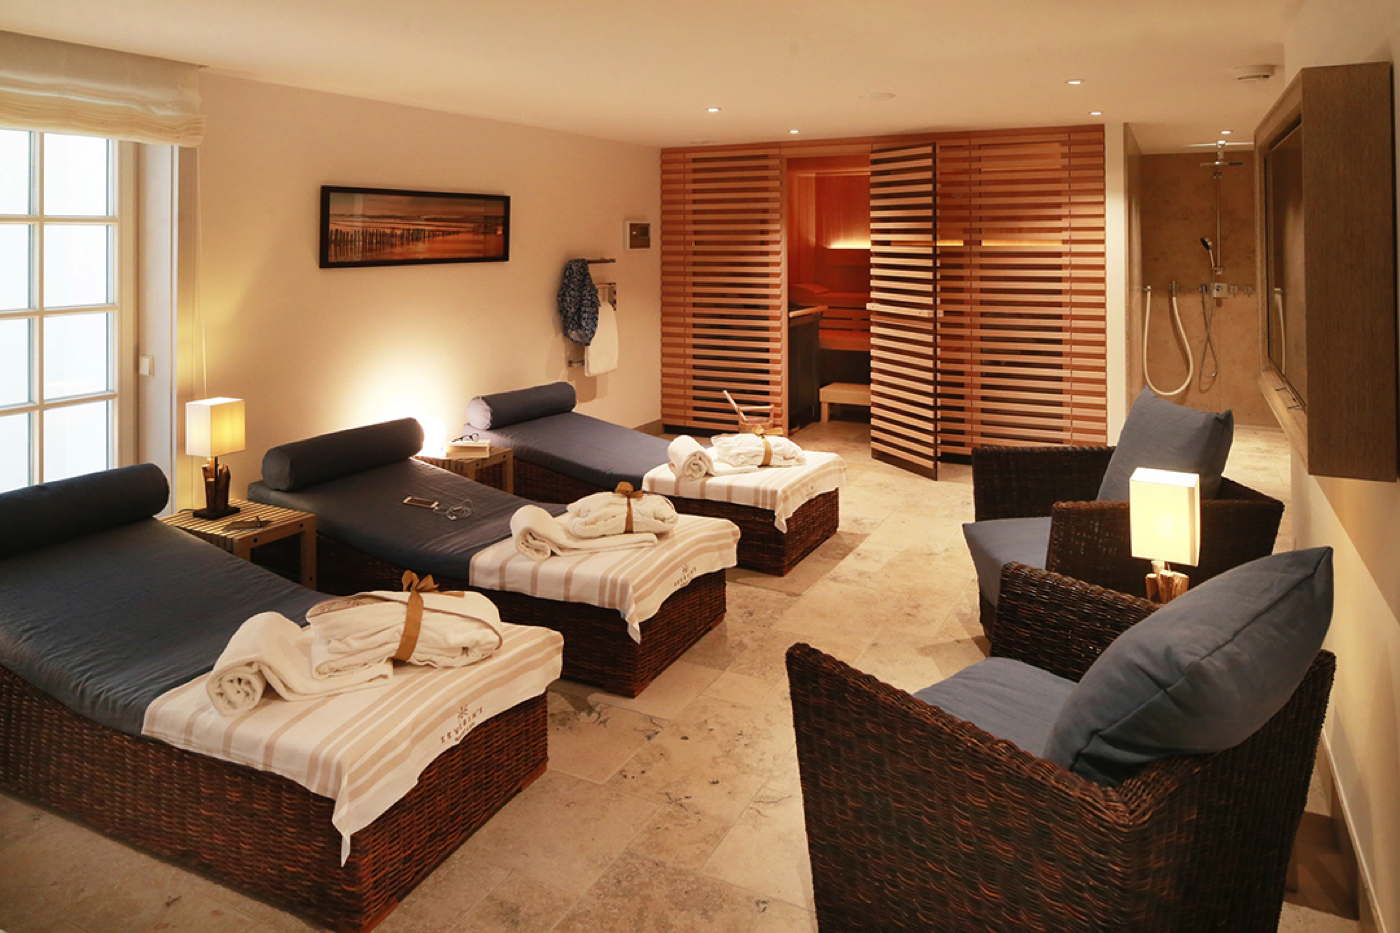 Luxury villa in hotel resort with spa and pool directly be the sea Sylt Germany